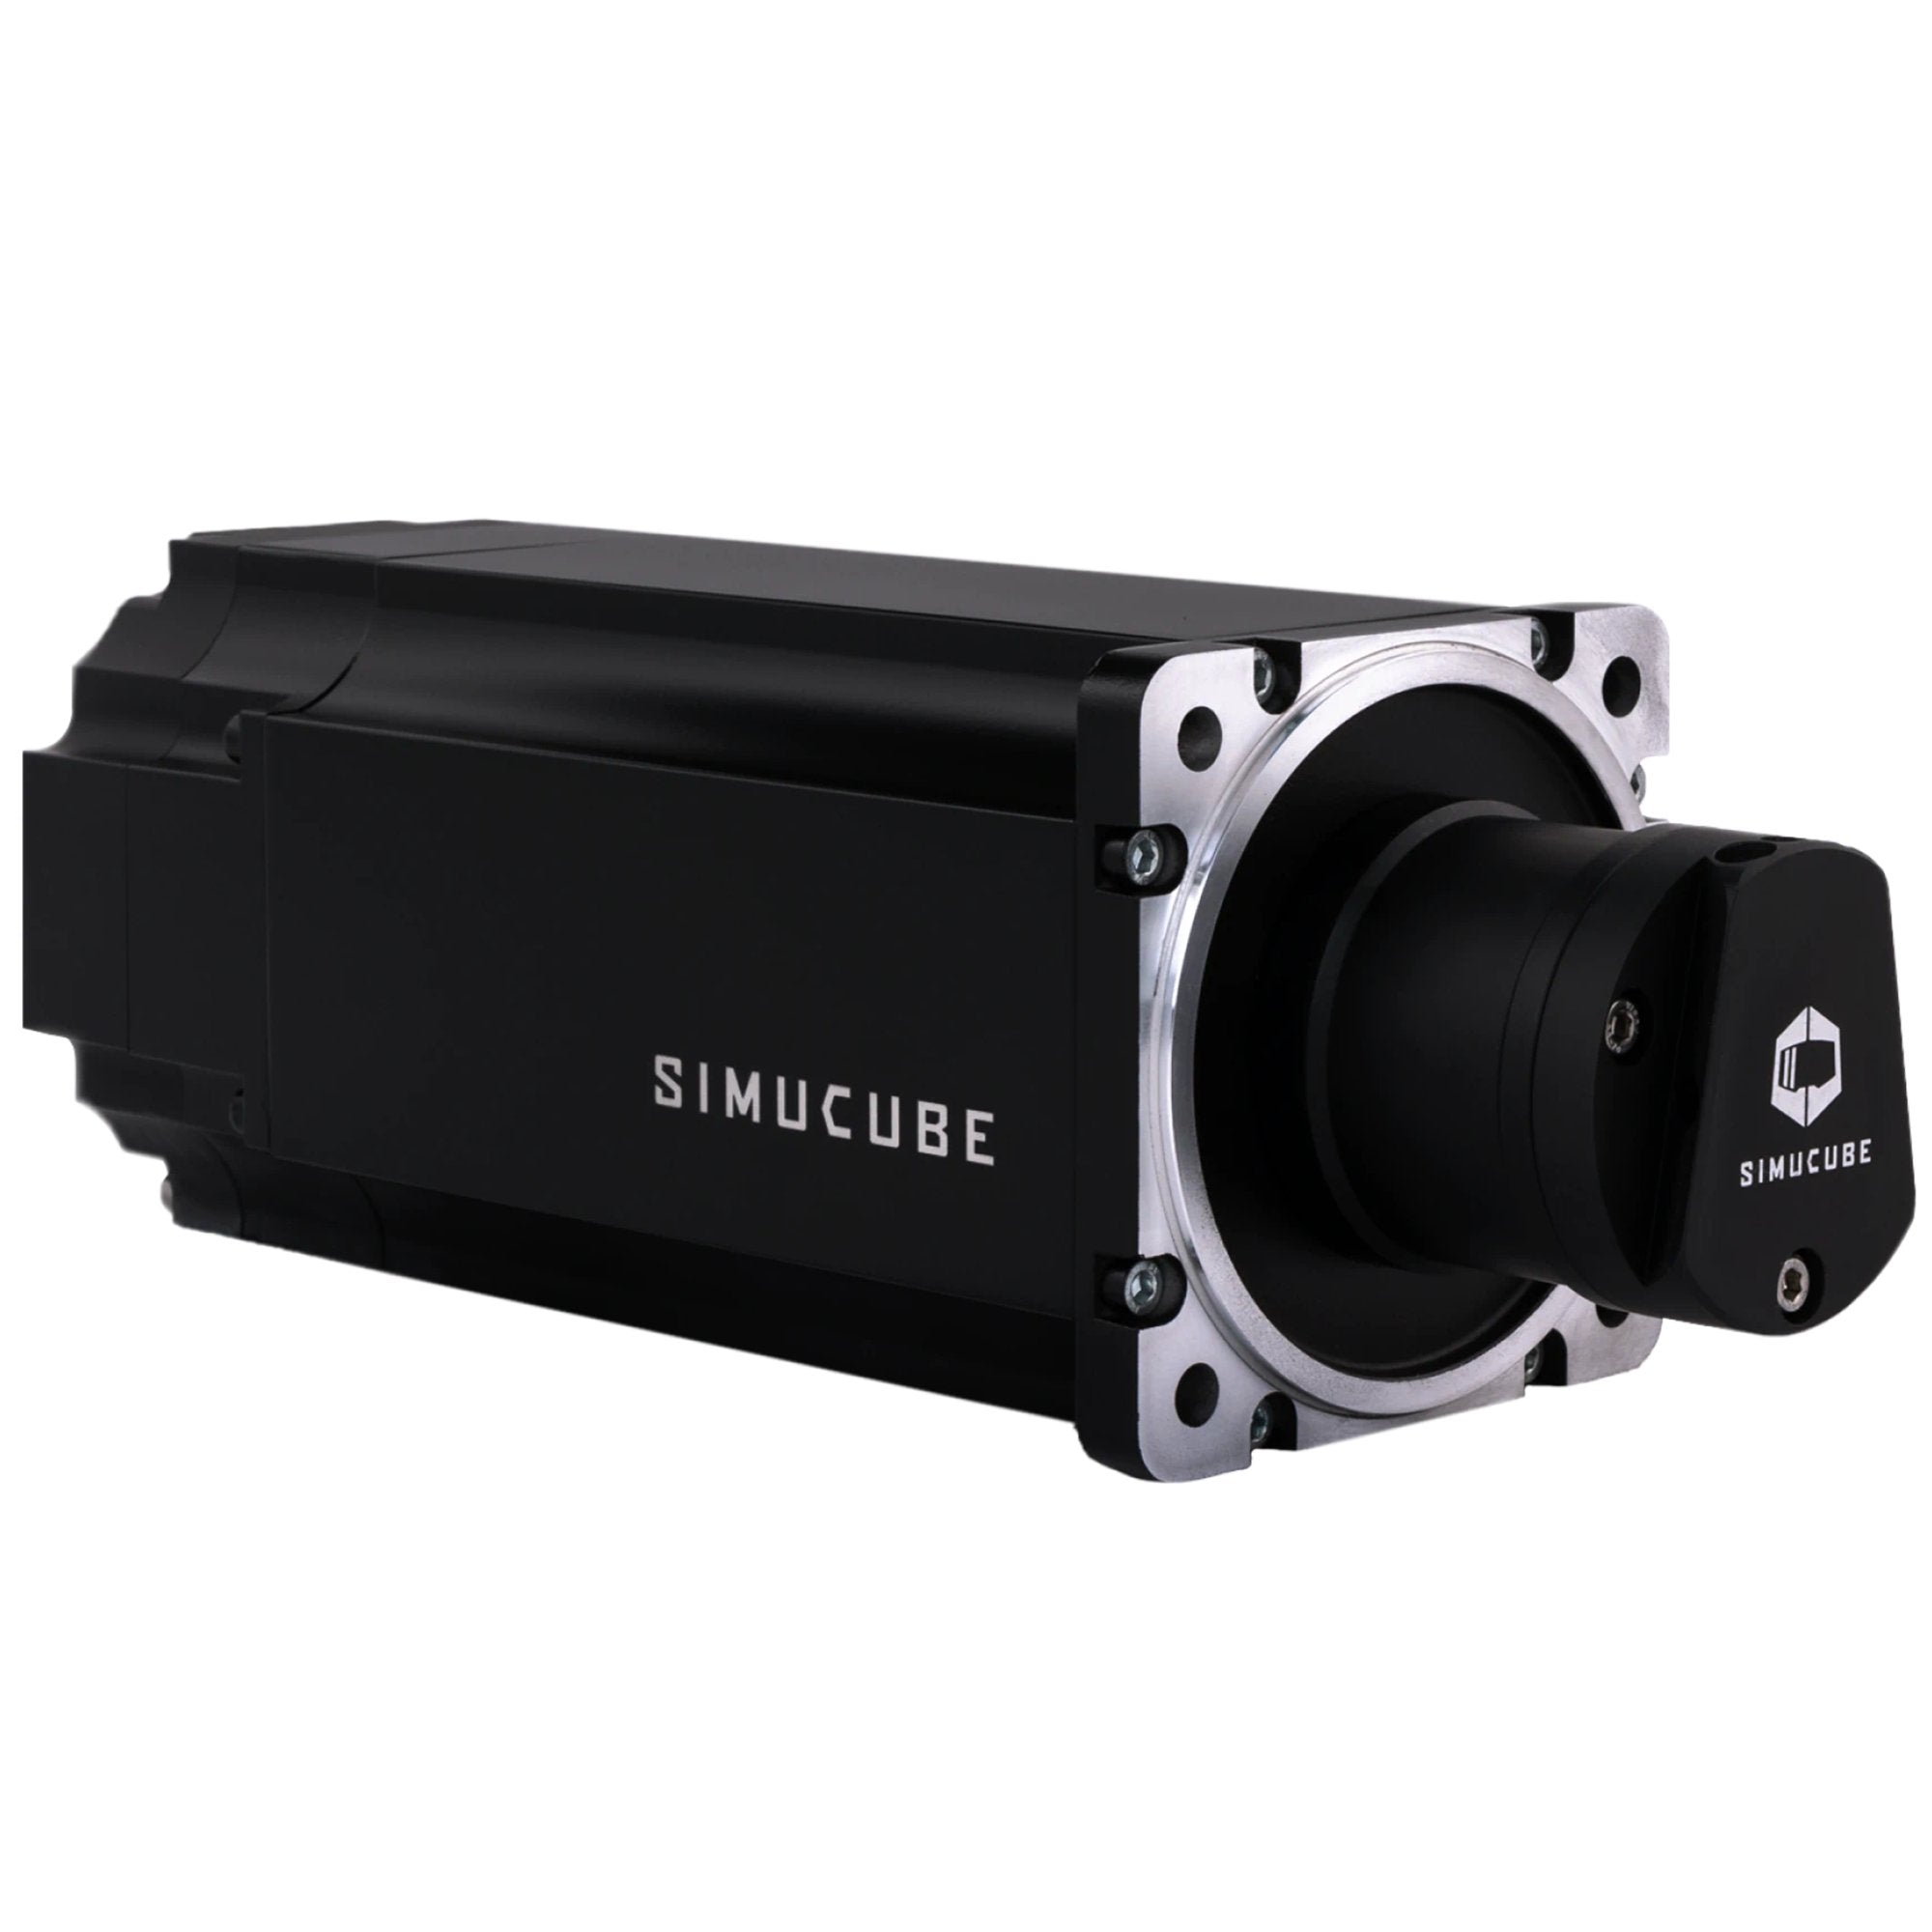 Simucube 2 Ultimate - Direct Drive Bases